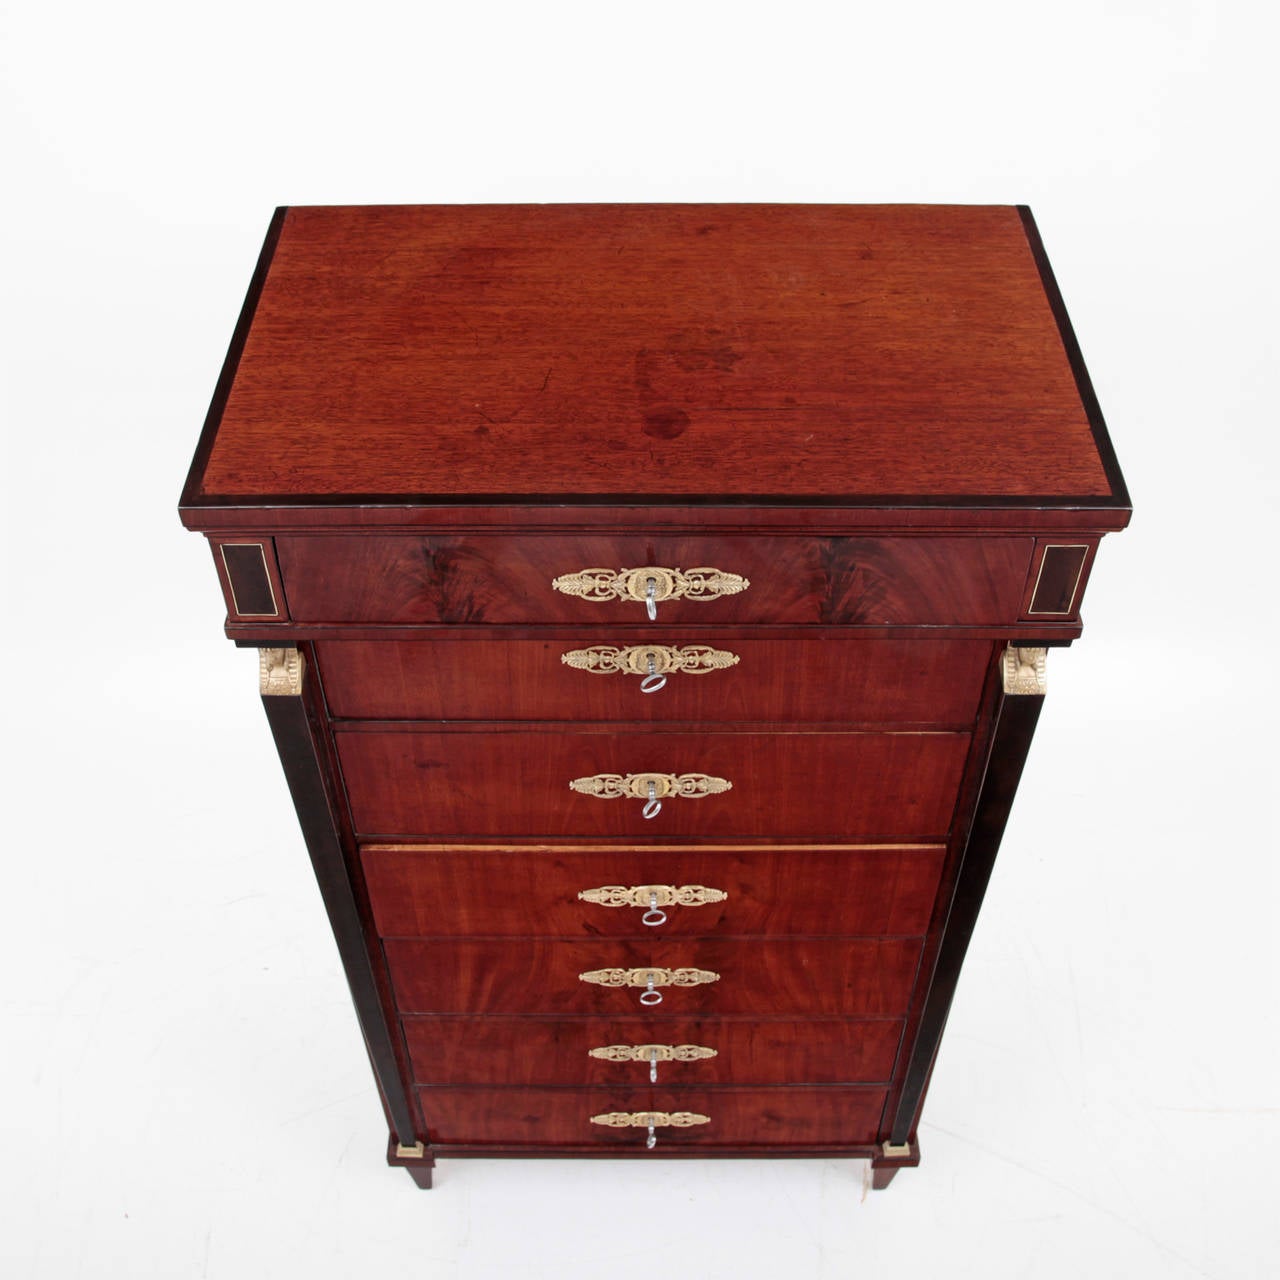 Neoclassical Vienna Empire Chest of Drawers or Semainaire from the 1810s